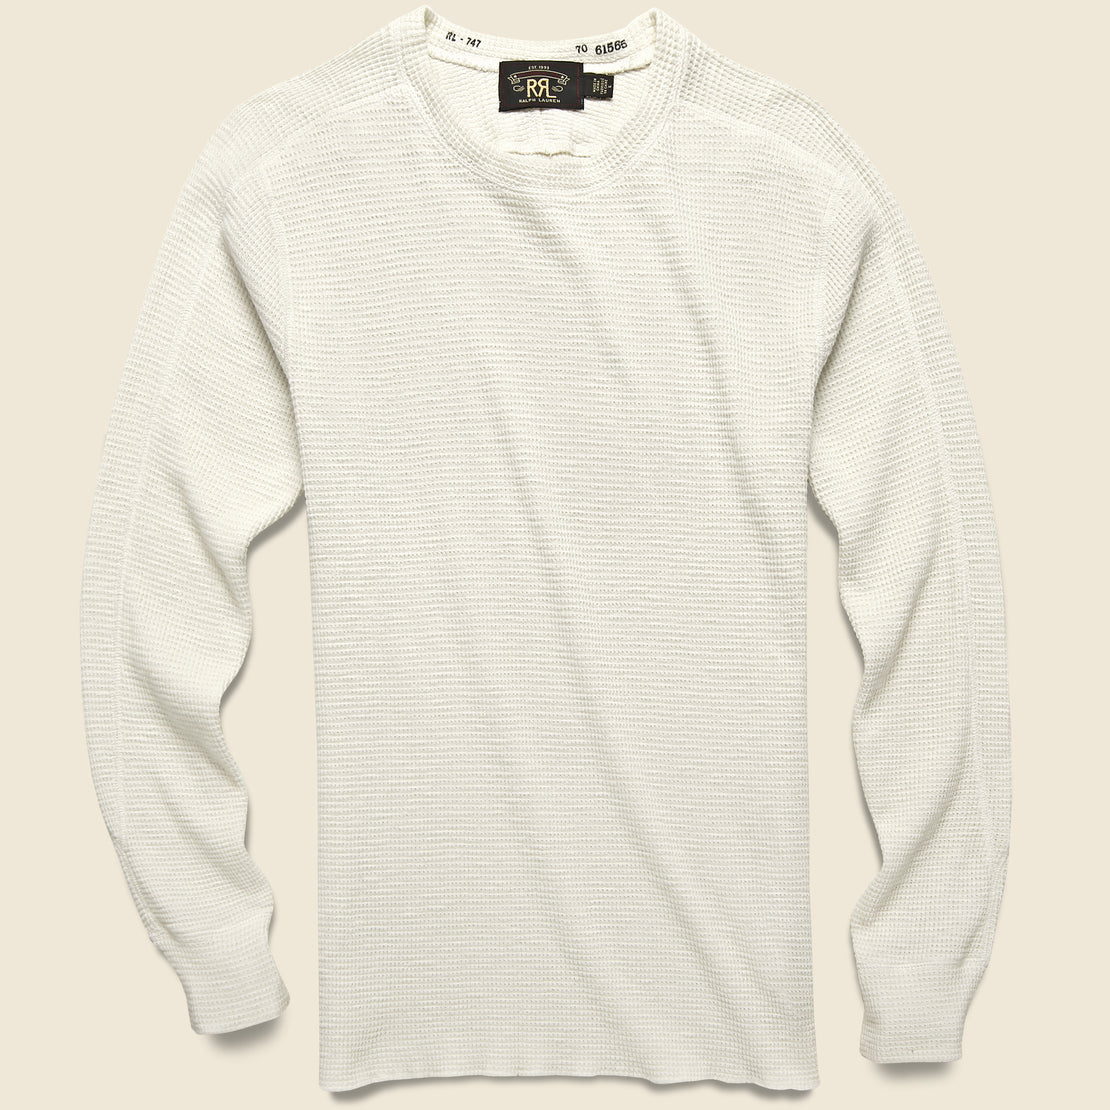 Iron Heart - IHTL-1301-WHT - Waffle Knit Crew Neck Thermal - White